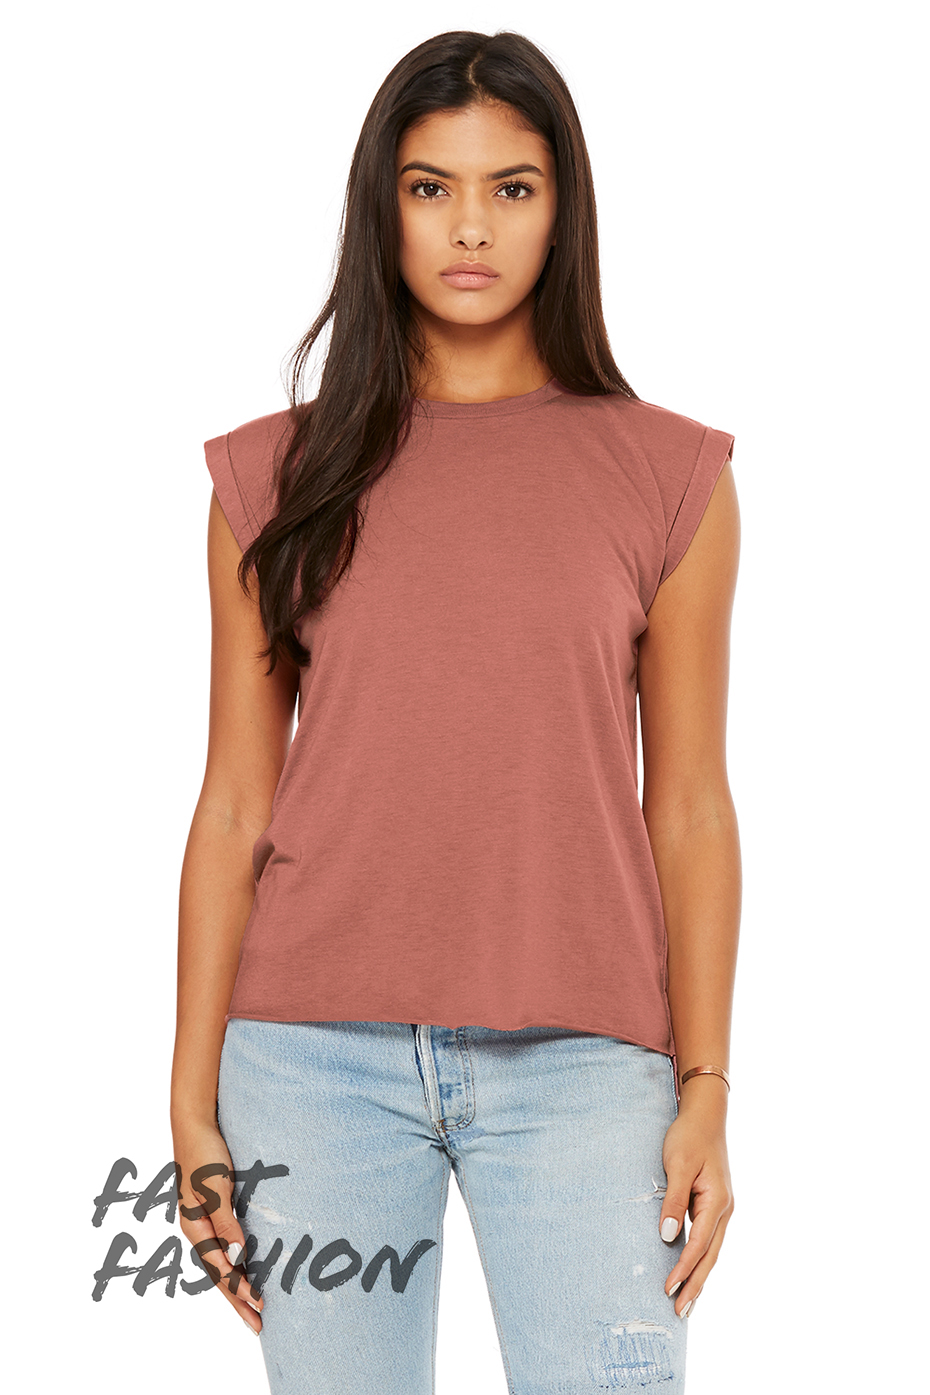 Women's Flowy Muscle Tee with Rolled Cuff | Bella-Canvas